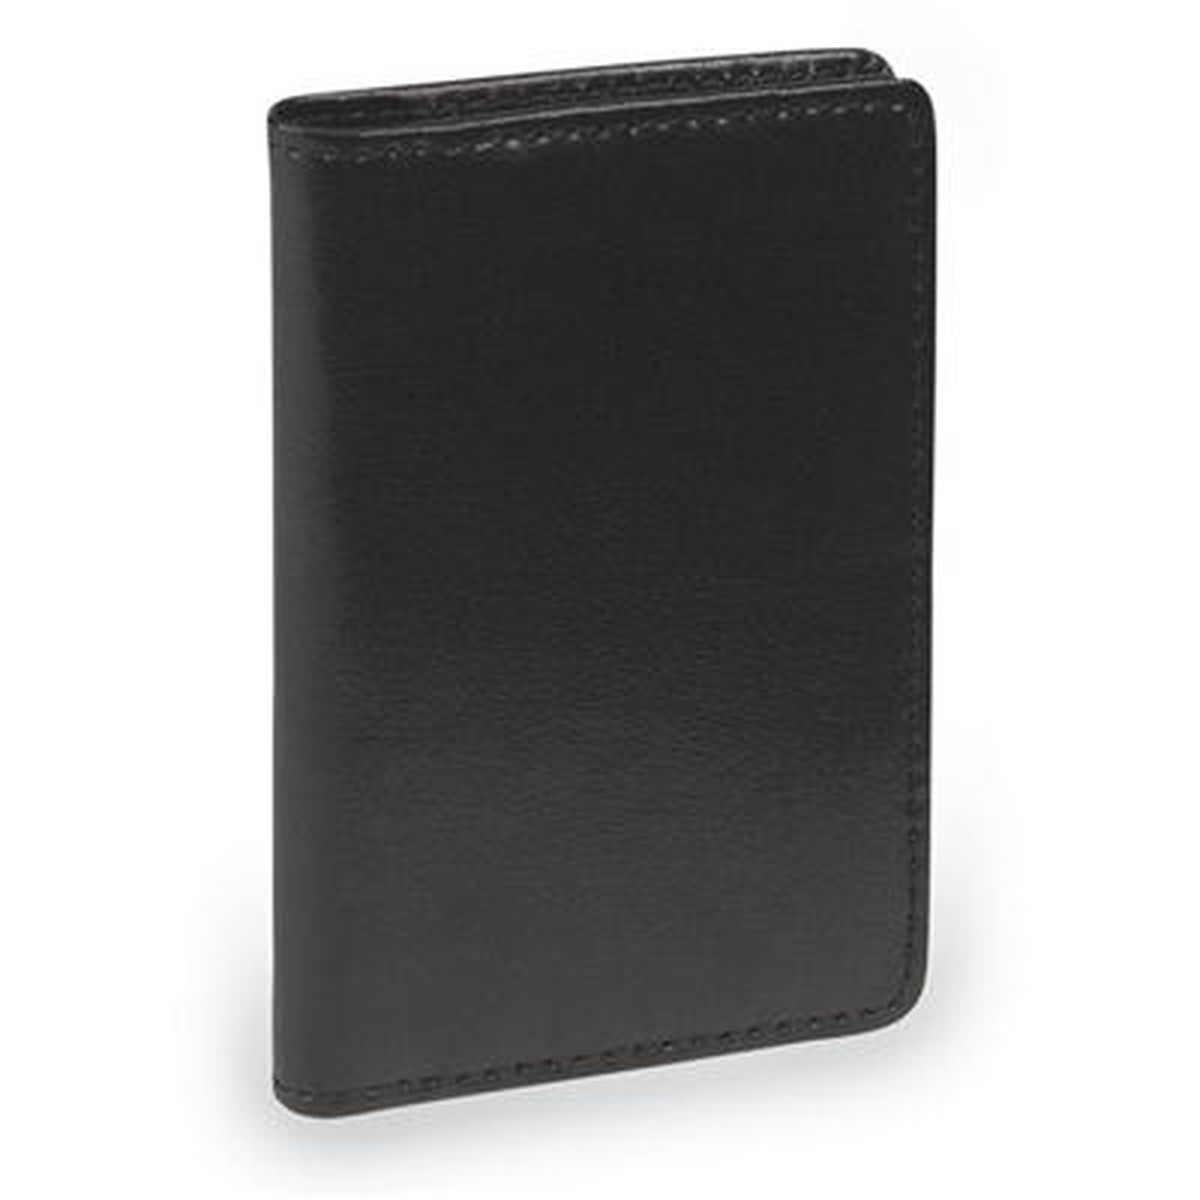 Samsill Regal Carrying Case (Wallet) Business Card - Black - Leather, Genuine Cowhide Leather Body - 1 Each